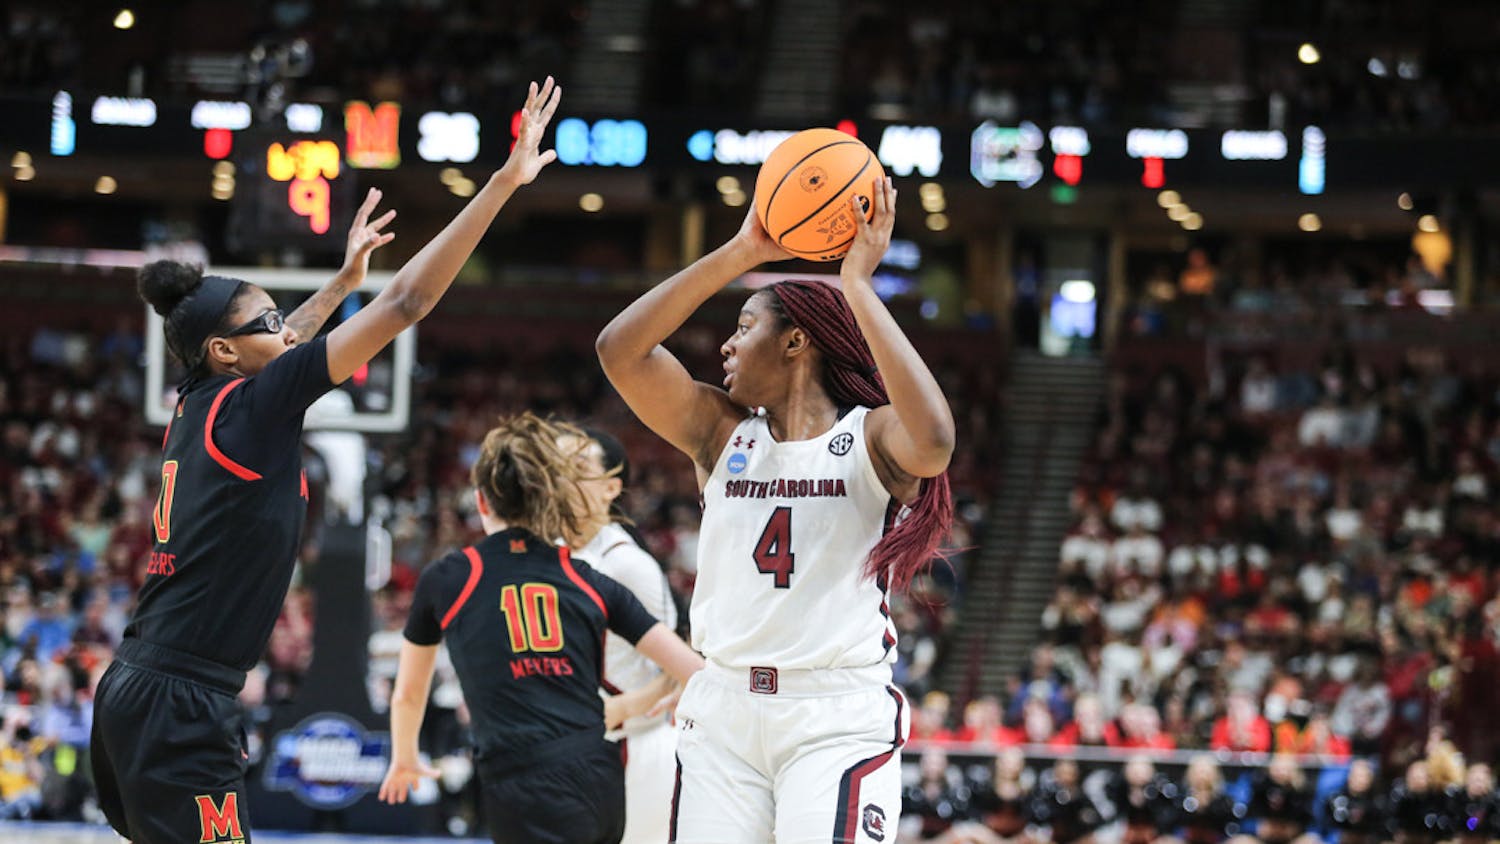 Senior forward Aliyah Boston looks to pass the ball during the Elite Eight game against Maryland on March 27, 2023. The Gamecocks won 86-75, advancing to the Final Four.